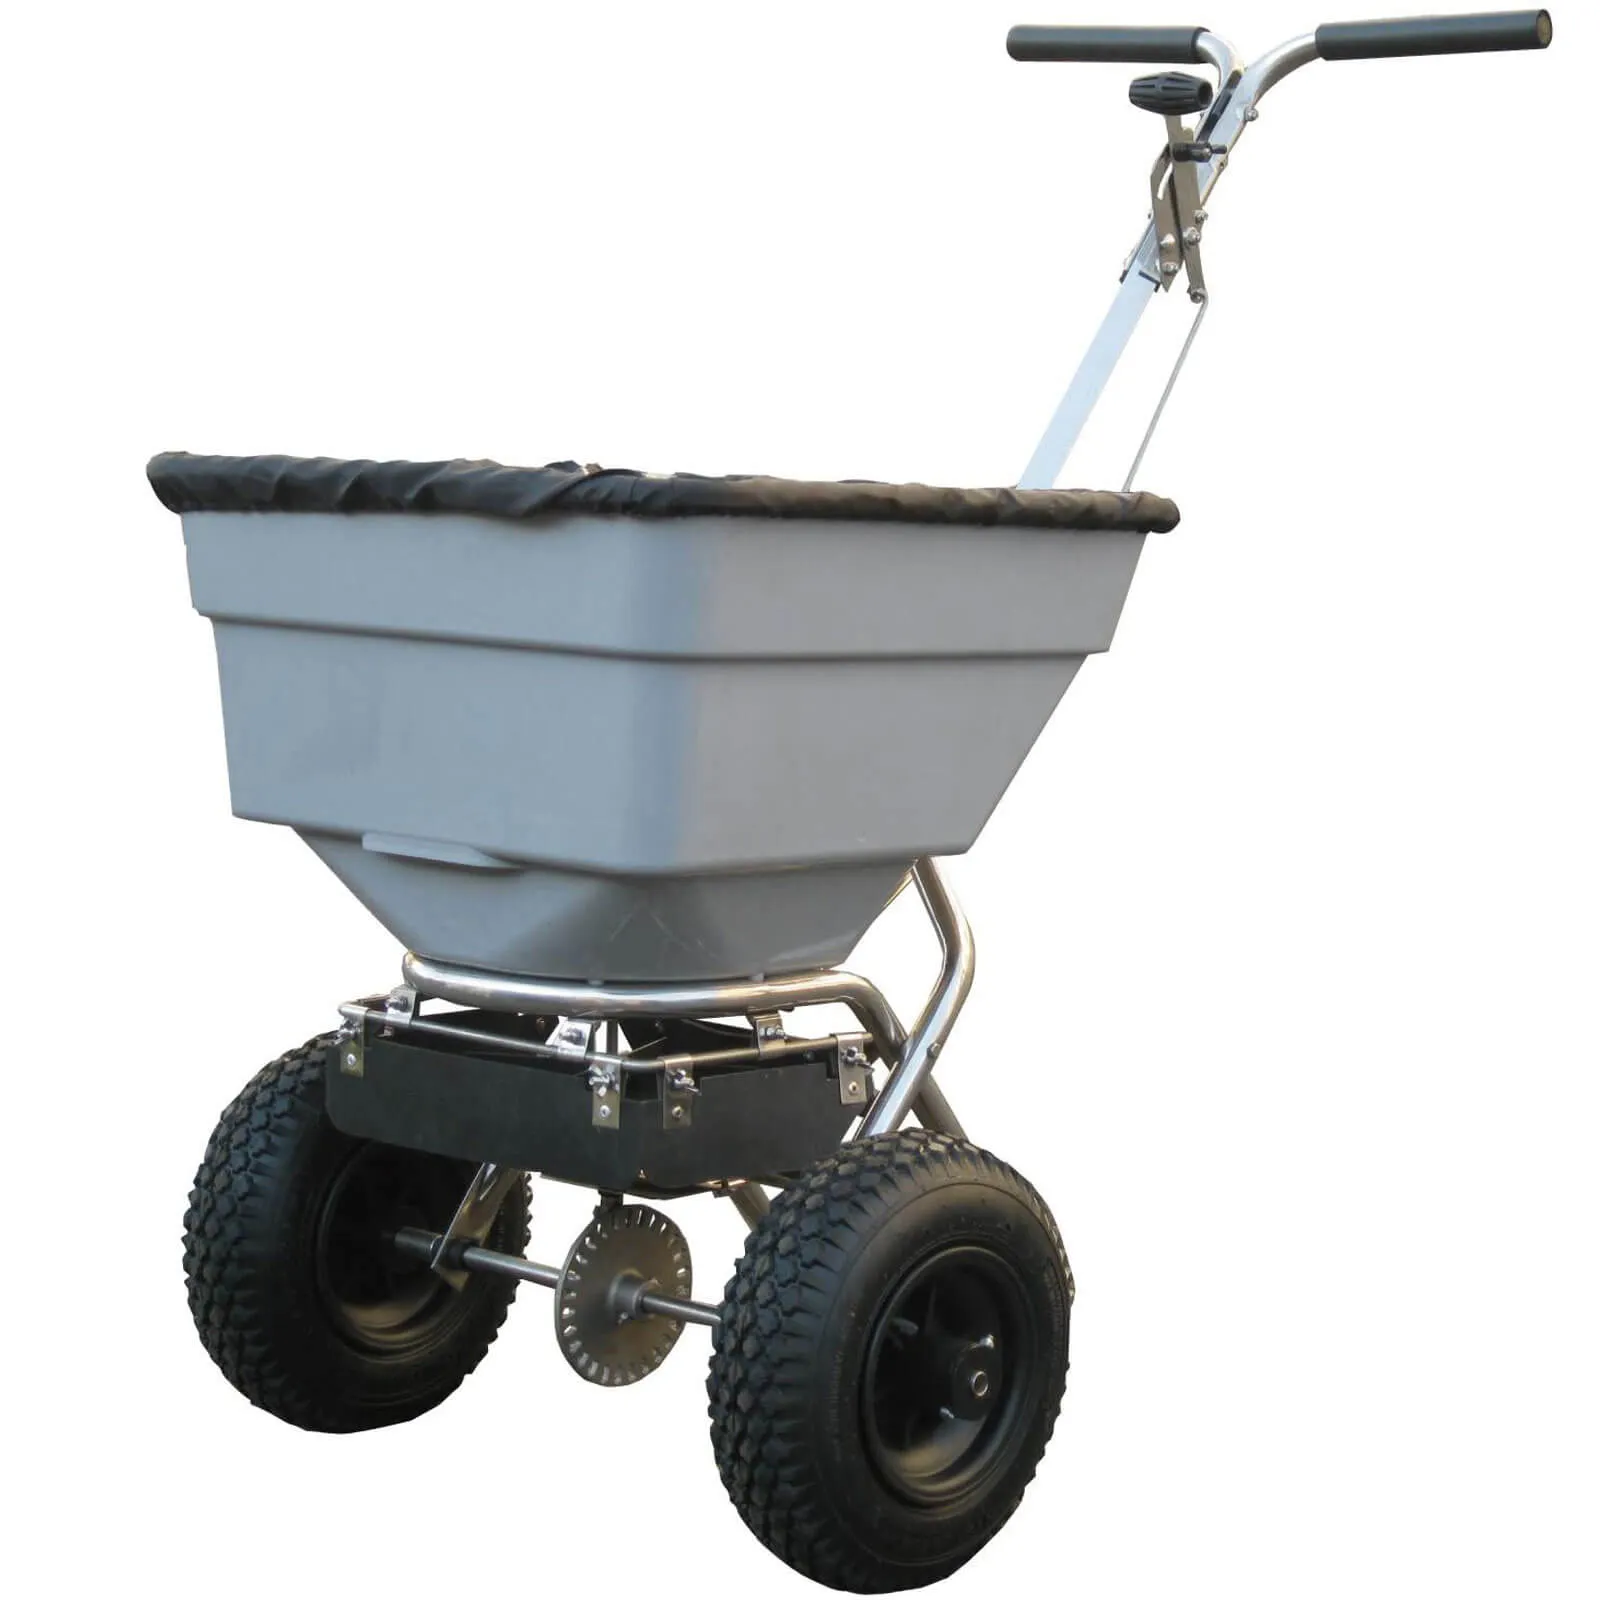 Handy THSS100 Stainless Steel Push Feed, Grass and Salt Broadcast Spreader - 45kg